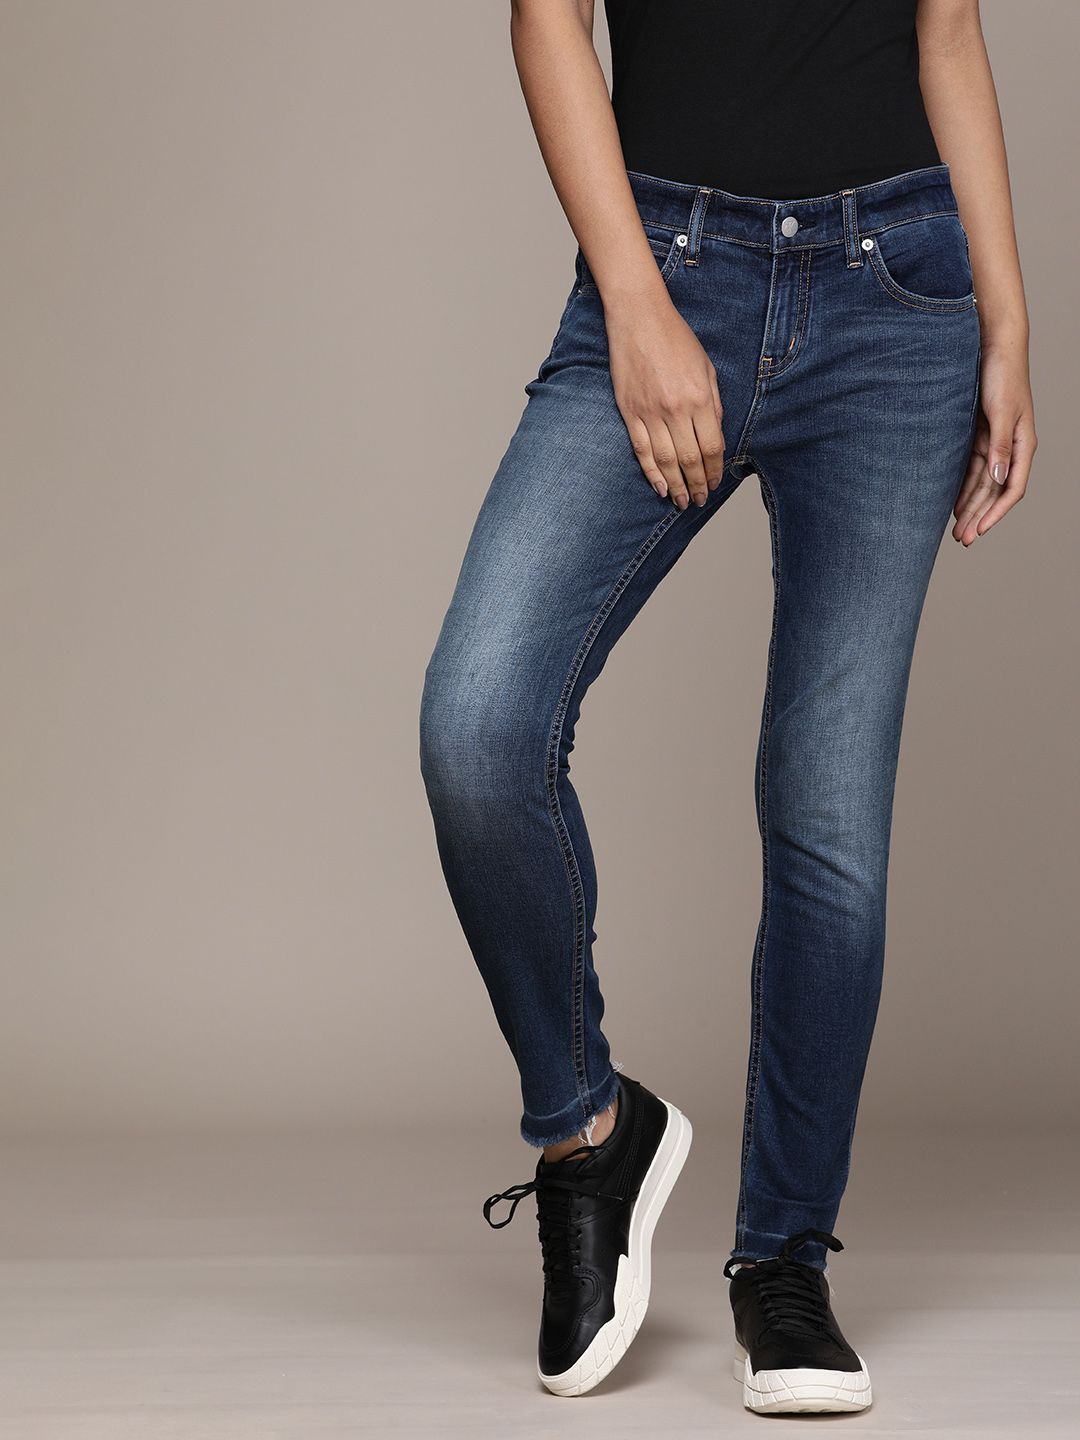 Calvin Klein Jeans Women Blue Body Slim Fit Heavy Fade Stretchable Casual Jeans Price in India